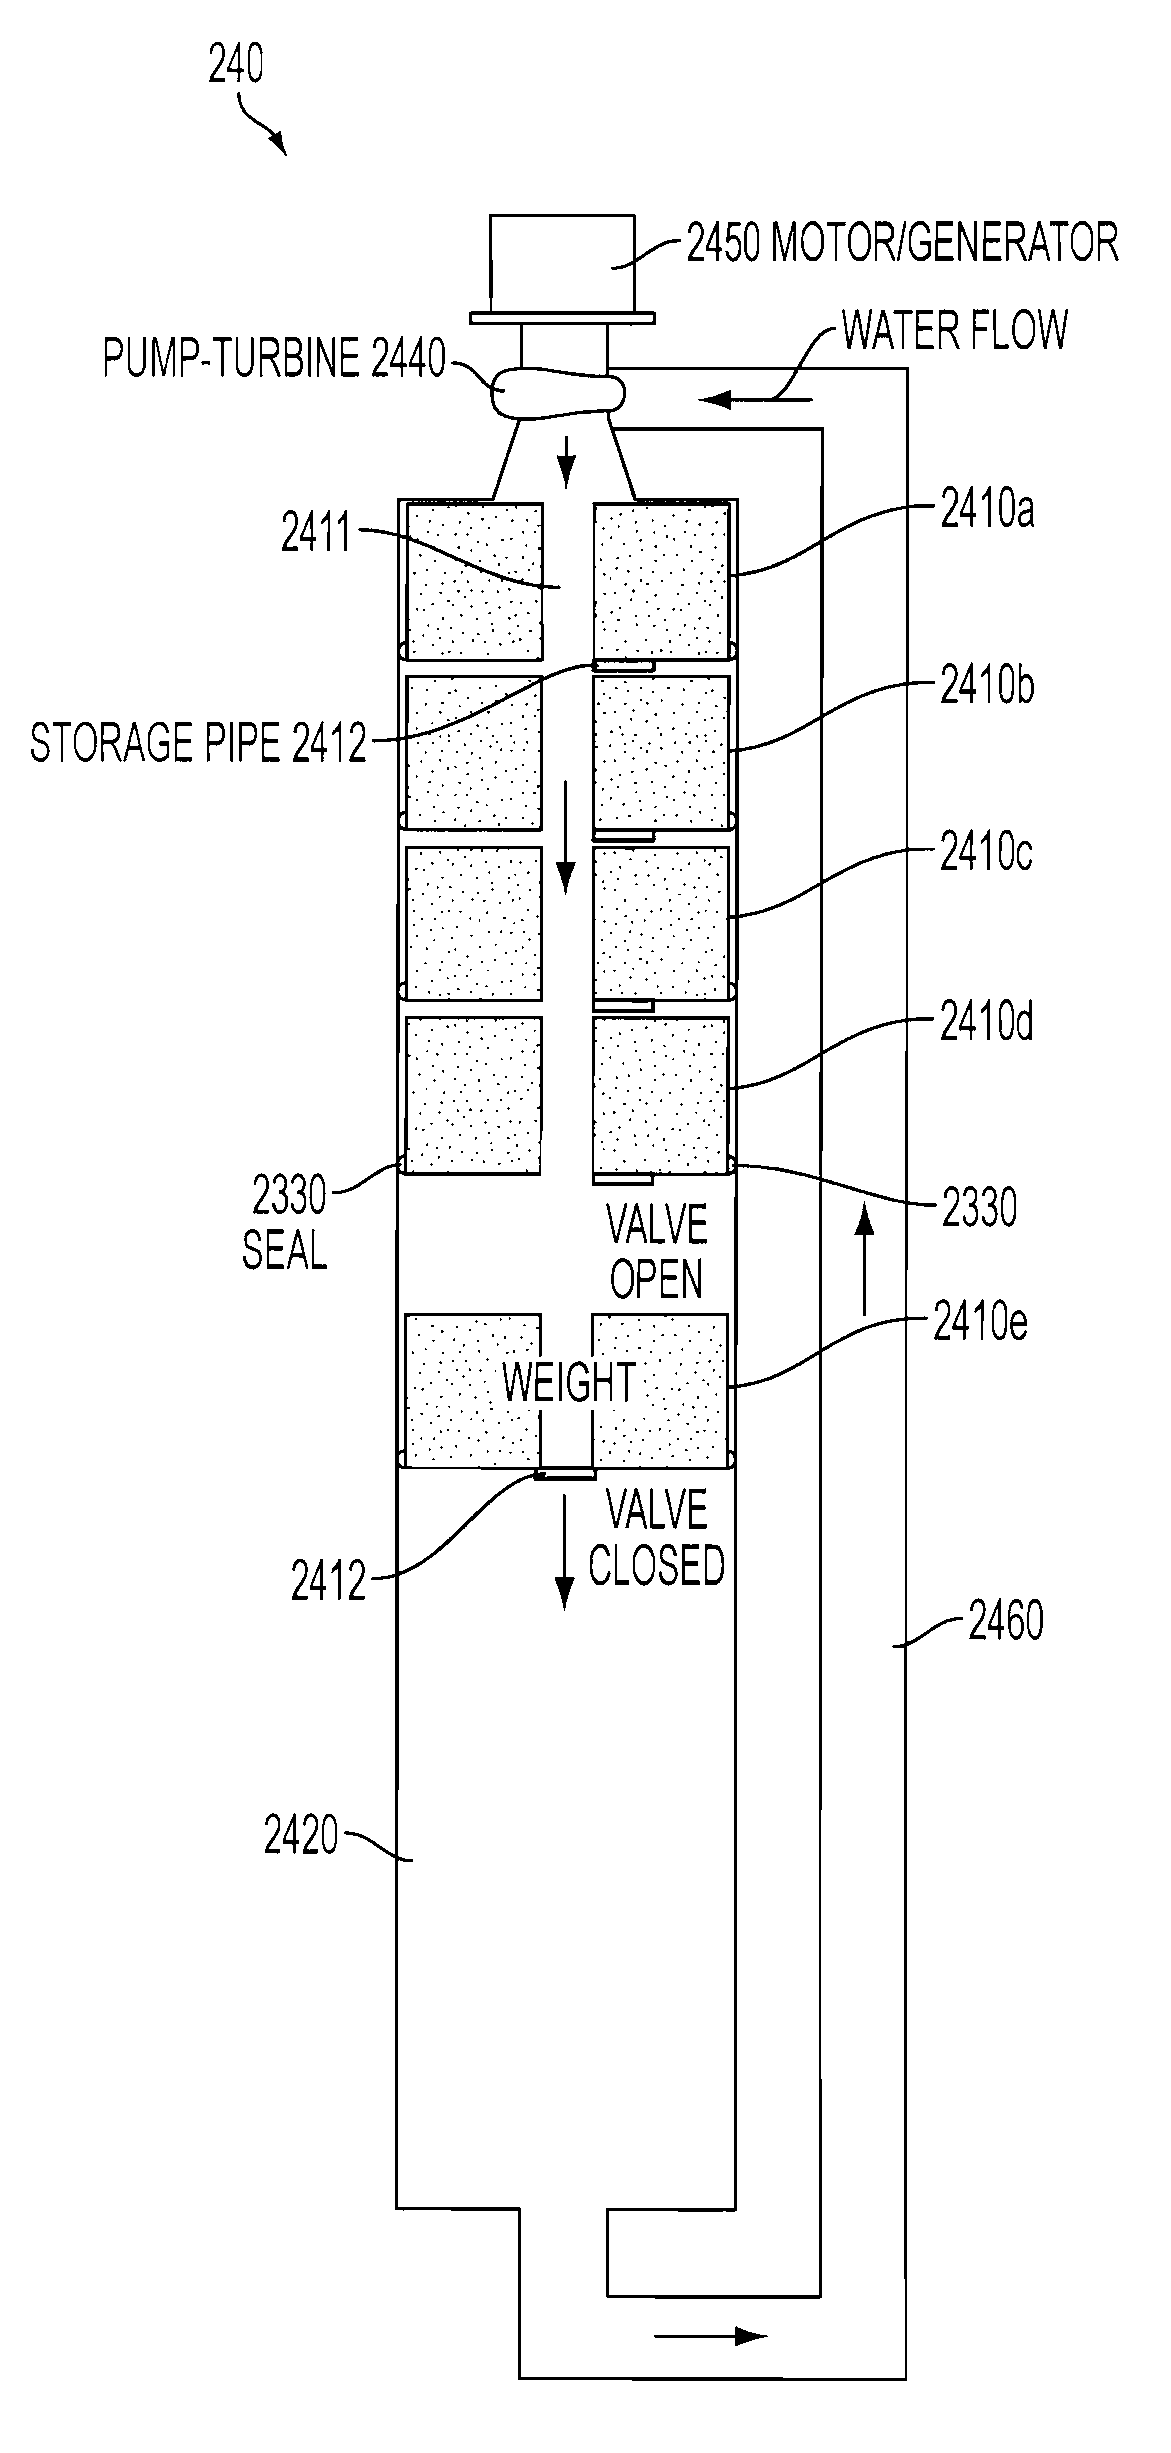 System and method for storing energy